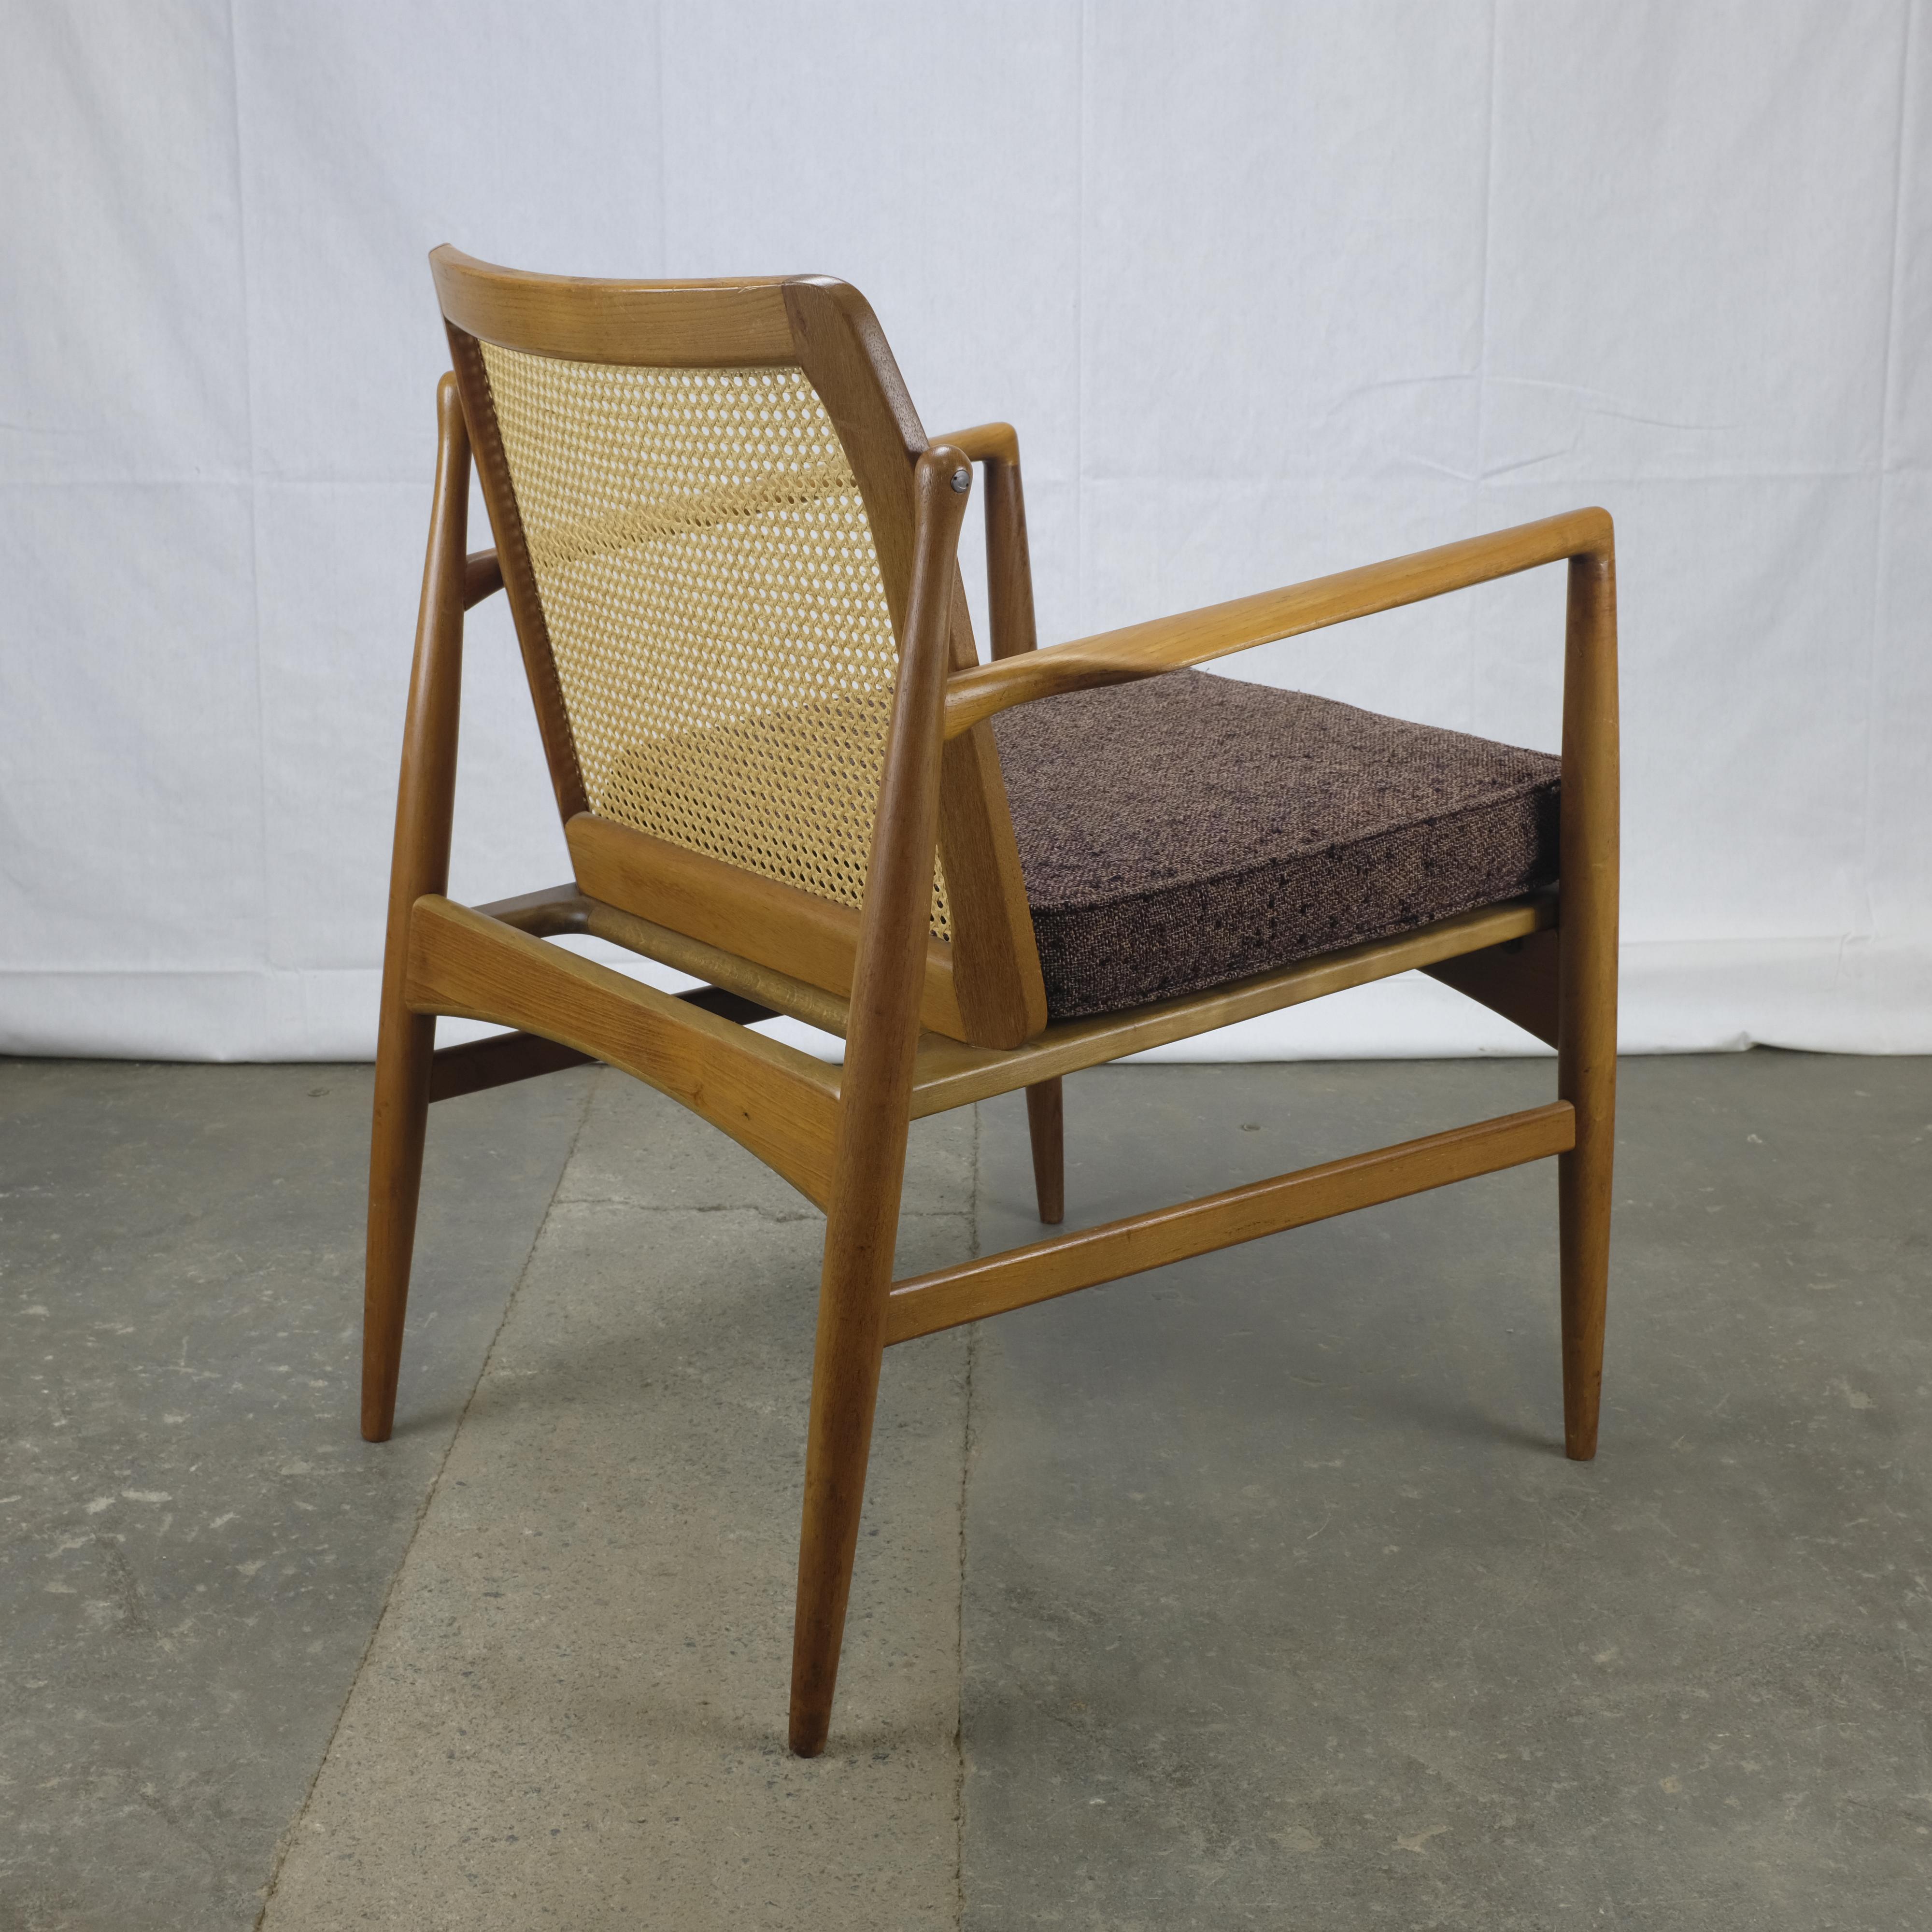 Ib Kofod-Larsen Danish Modern Teak Cane-Backed Armchair by Selig In Excellent Condition For Sale In Ottawa, ON